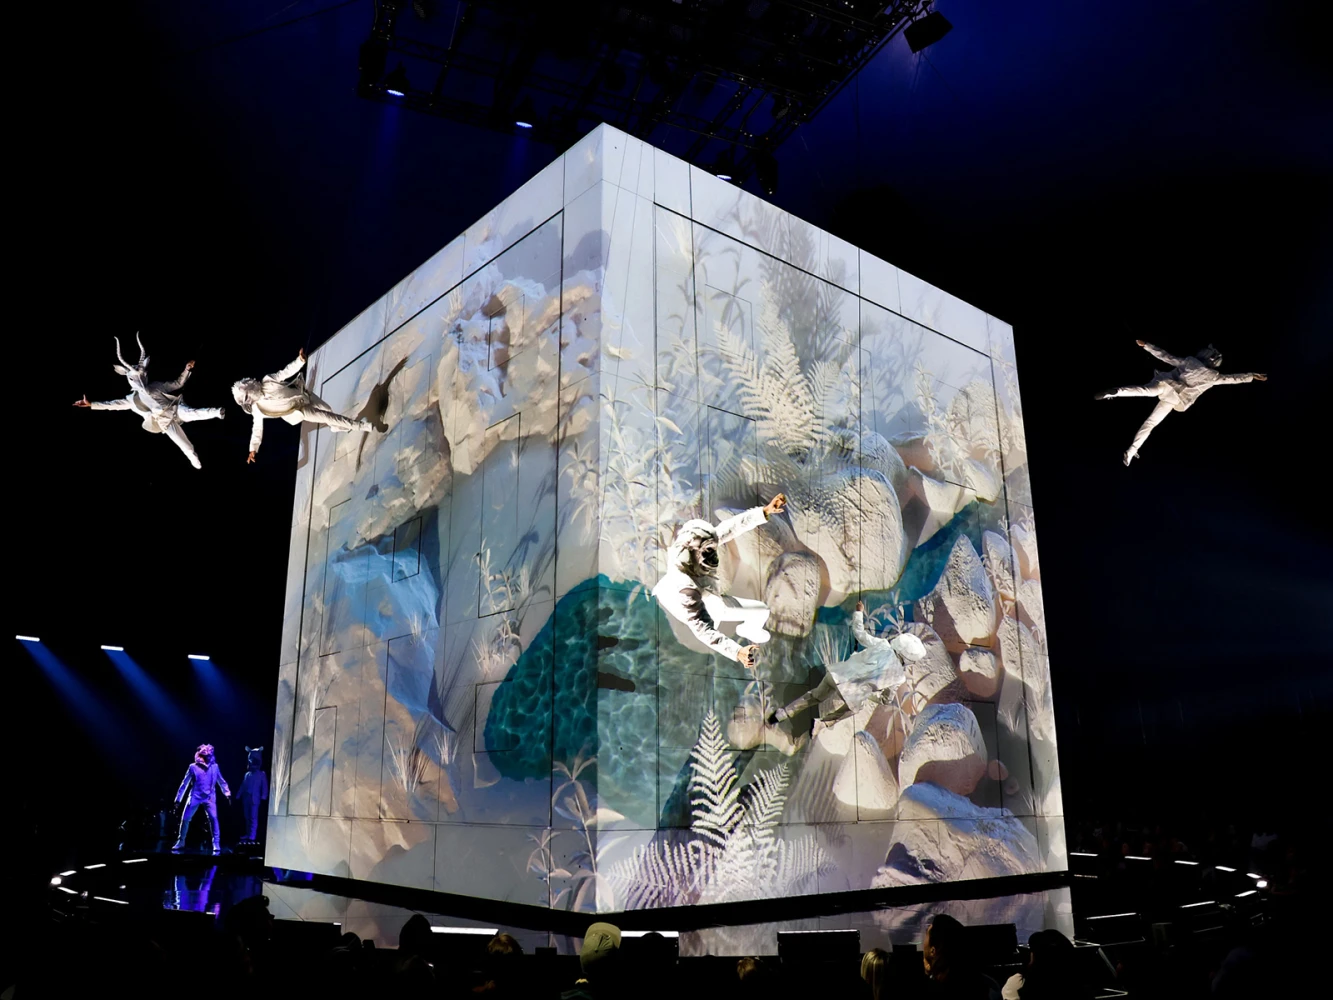 Cirque du Soleil: Echo: What to expect - 3